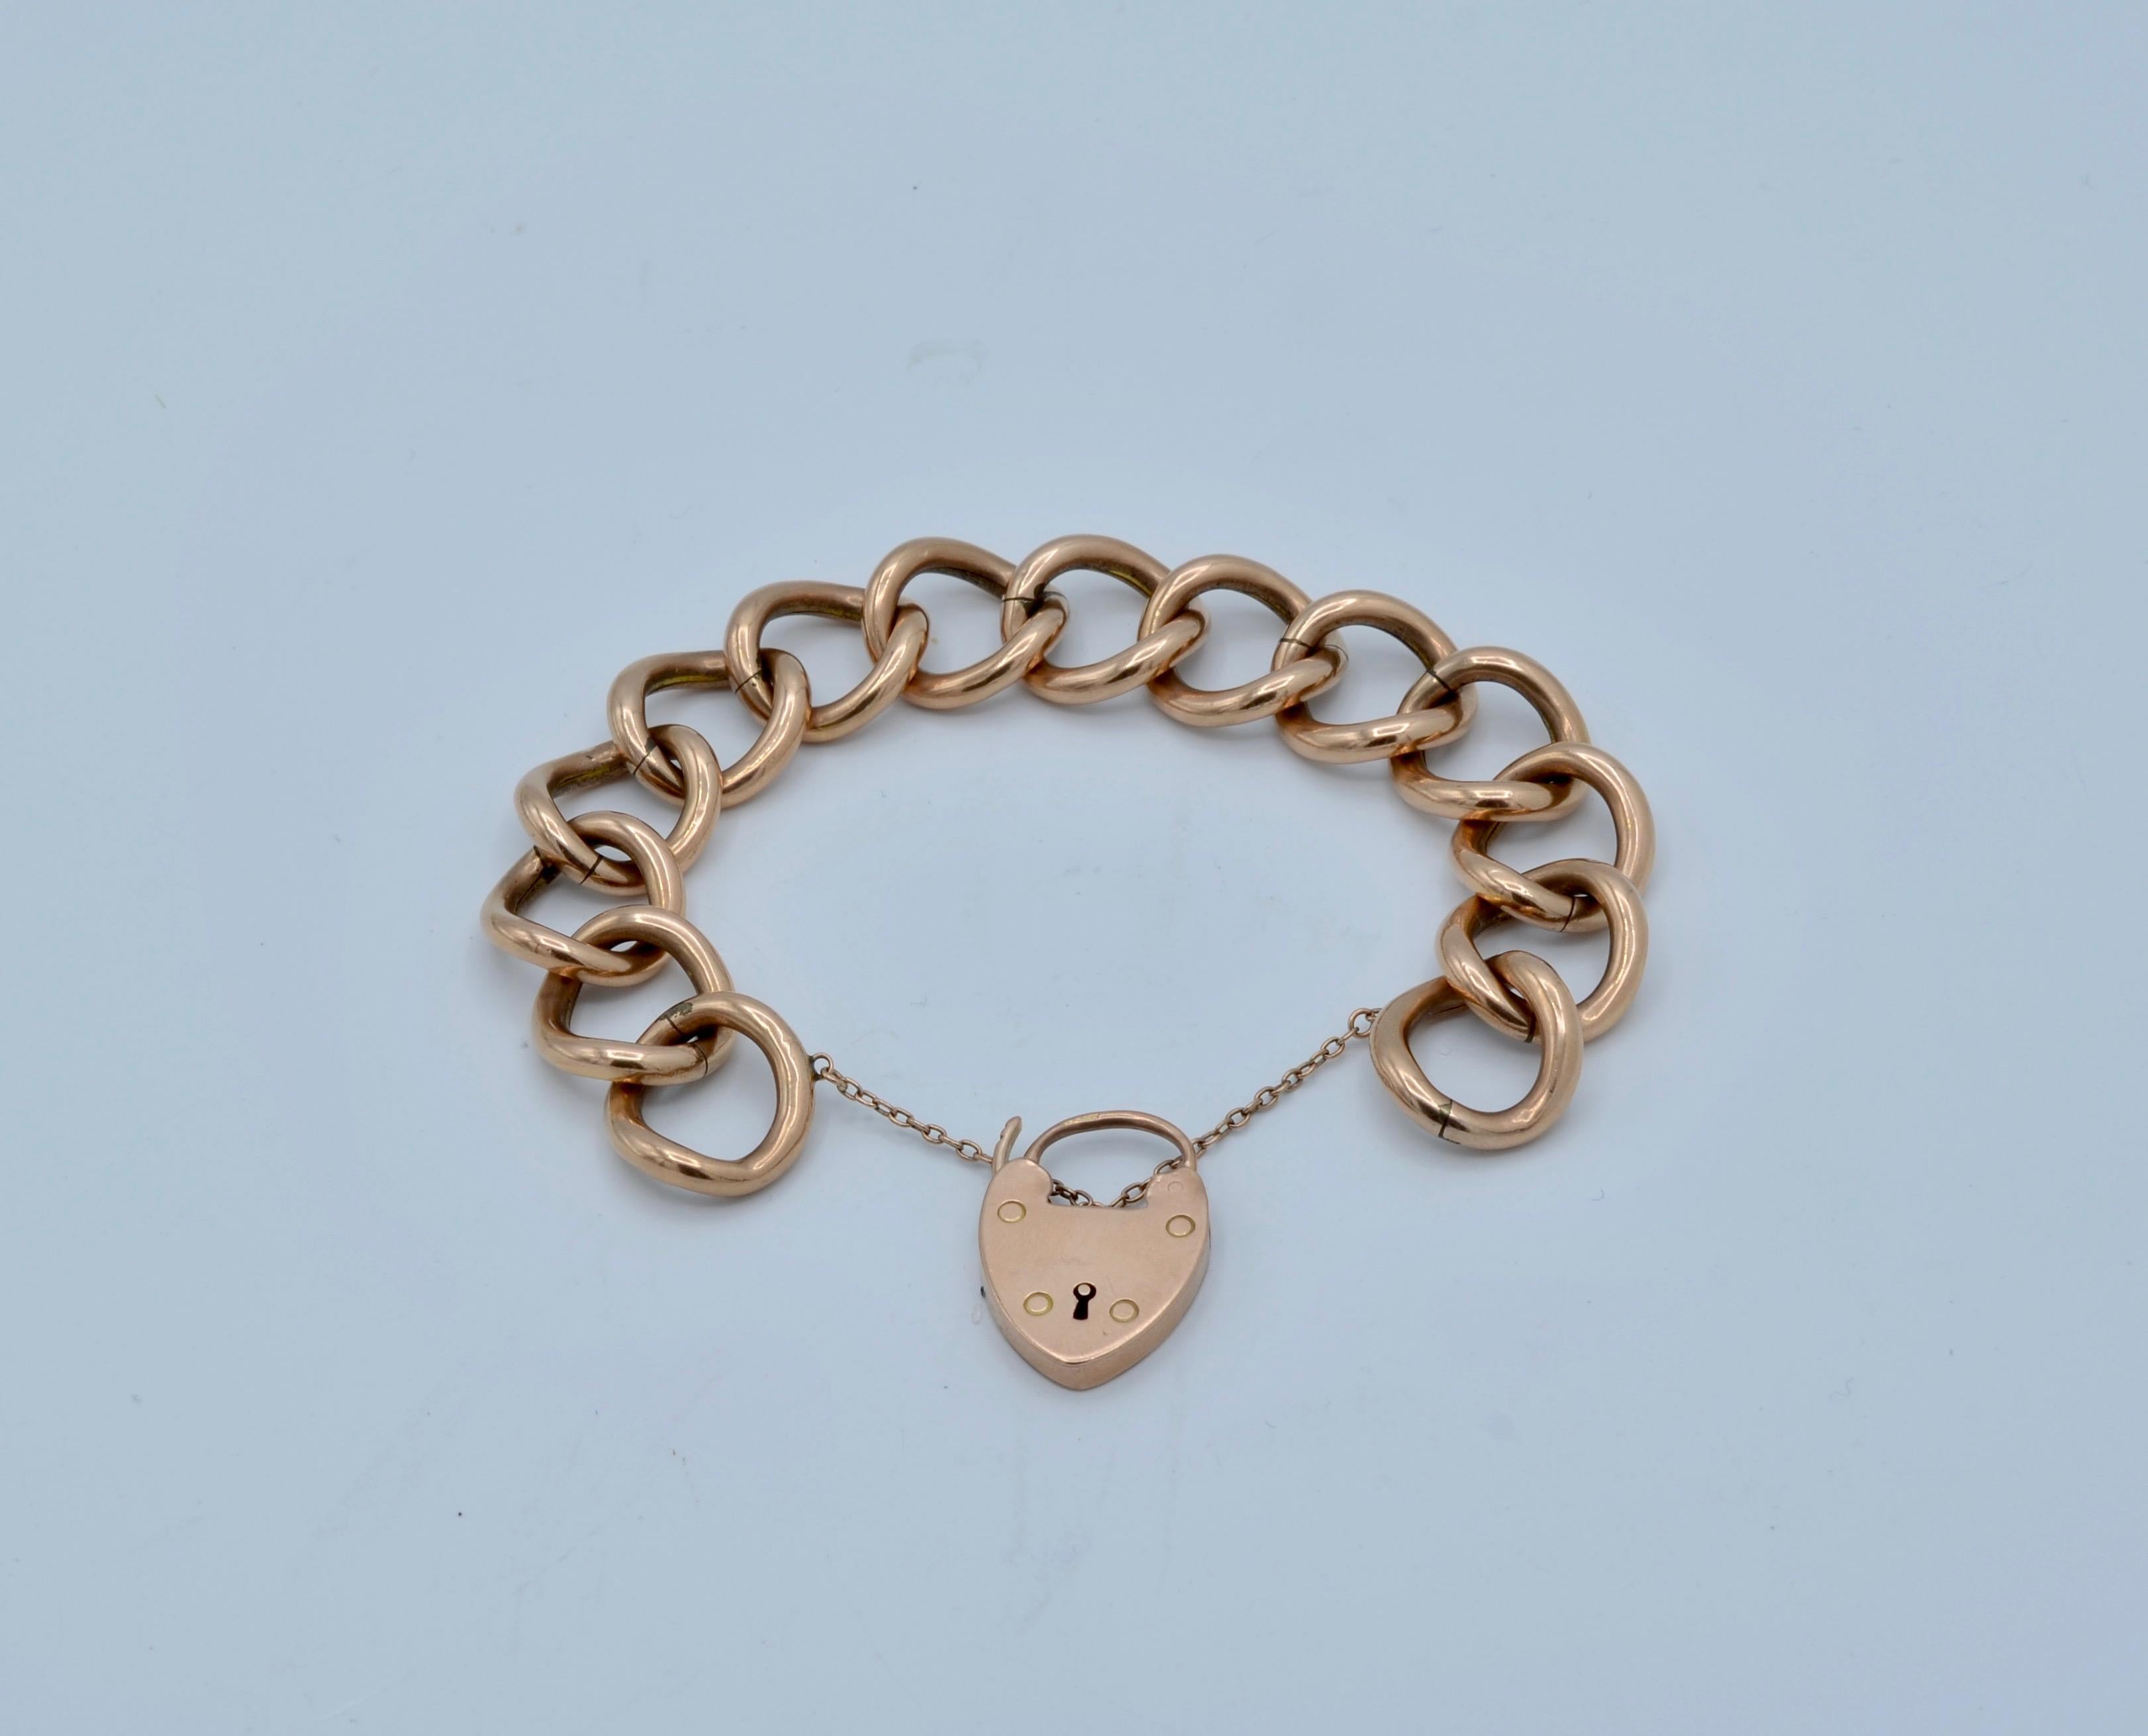 This amazing link bracelet has a beautiful heart locket as a clasp that works beautifully. There is a safety chain attached to the heart. The twisted links fit comfortably on the wrist and the warm glow of rose gold looks stunning on any skin tone.